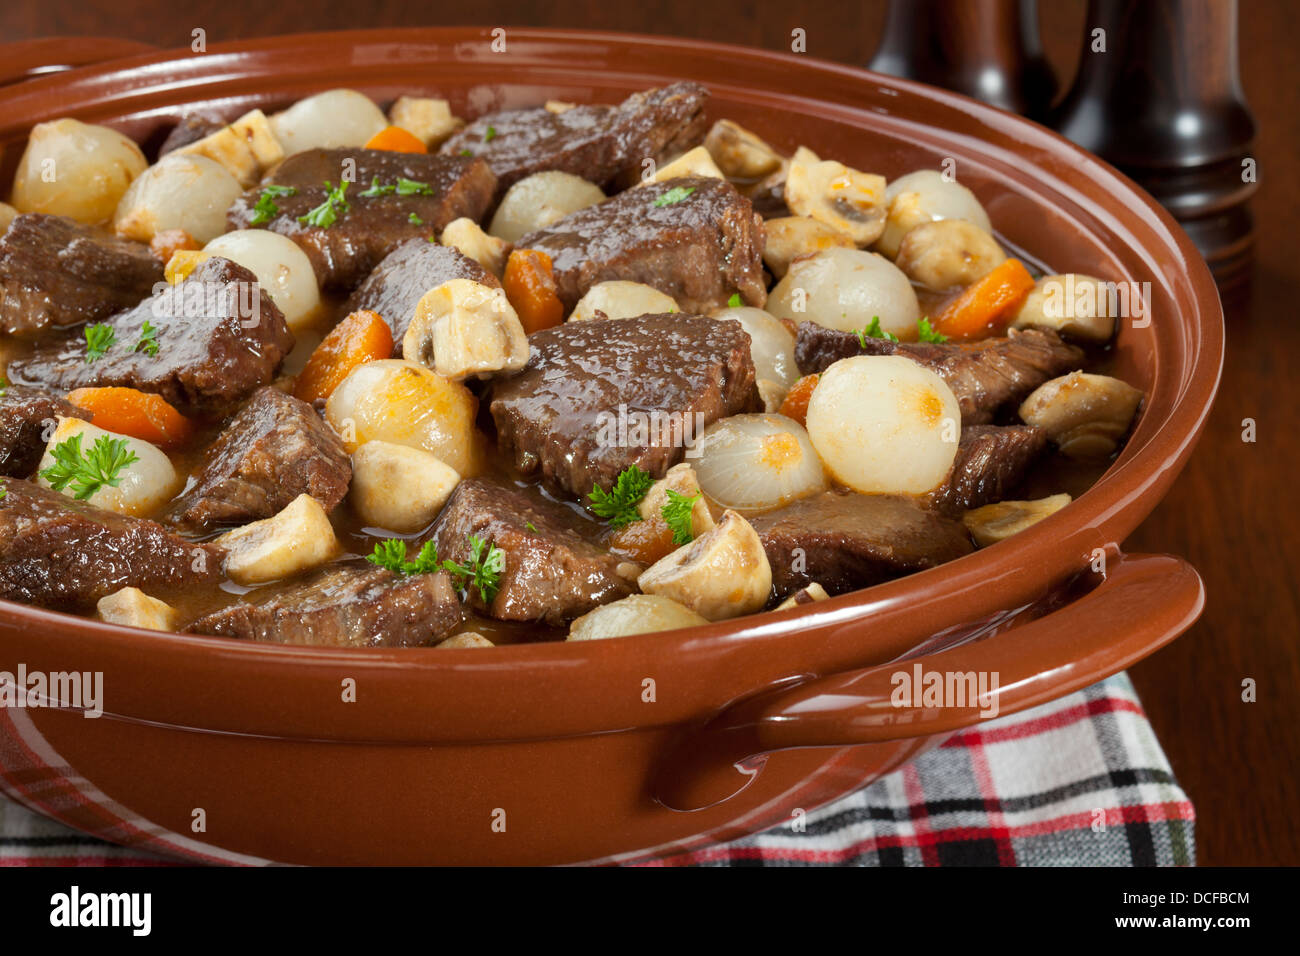 Beef Bourguignon - classic French stew, beef bourguignon, beef cooked in red wine with onions, mushrooms, bacon and carrots. Stock Photo